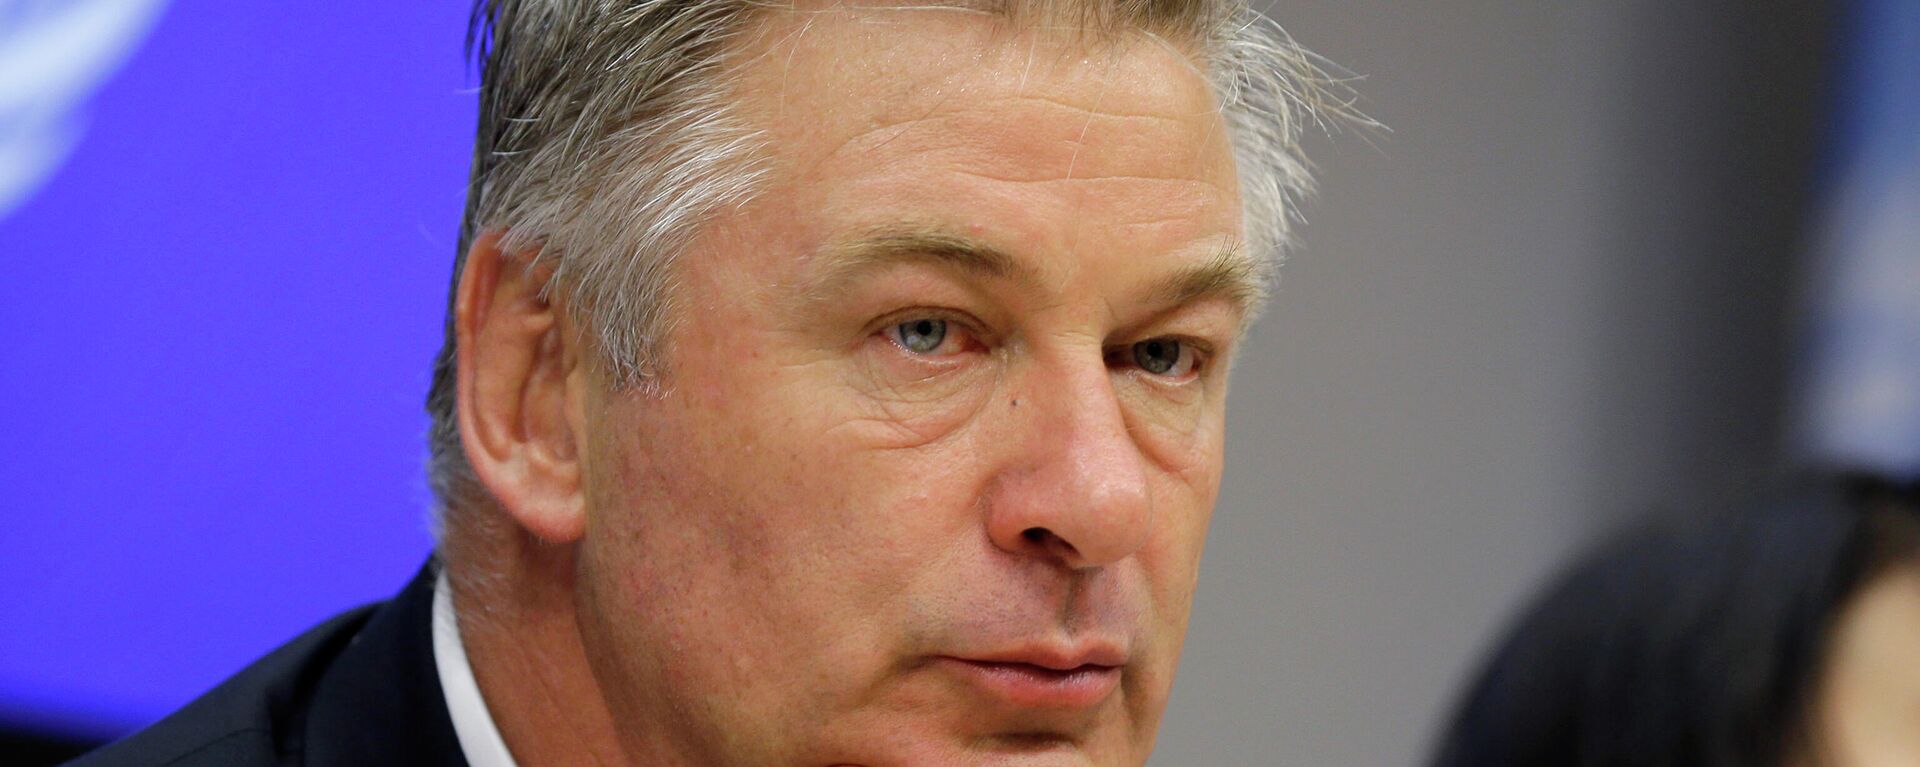 In this Sept. 21, 2015 file photo, actor Alec Baldwin attends a news conference at United Nations headquarters. - Sputnik International, 1920, 01.12.2021